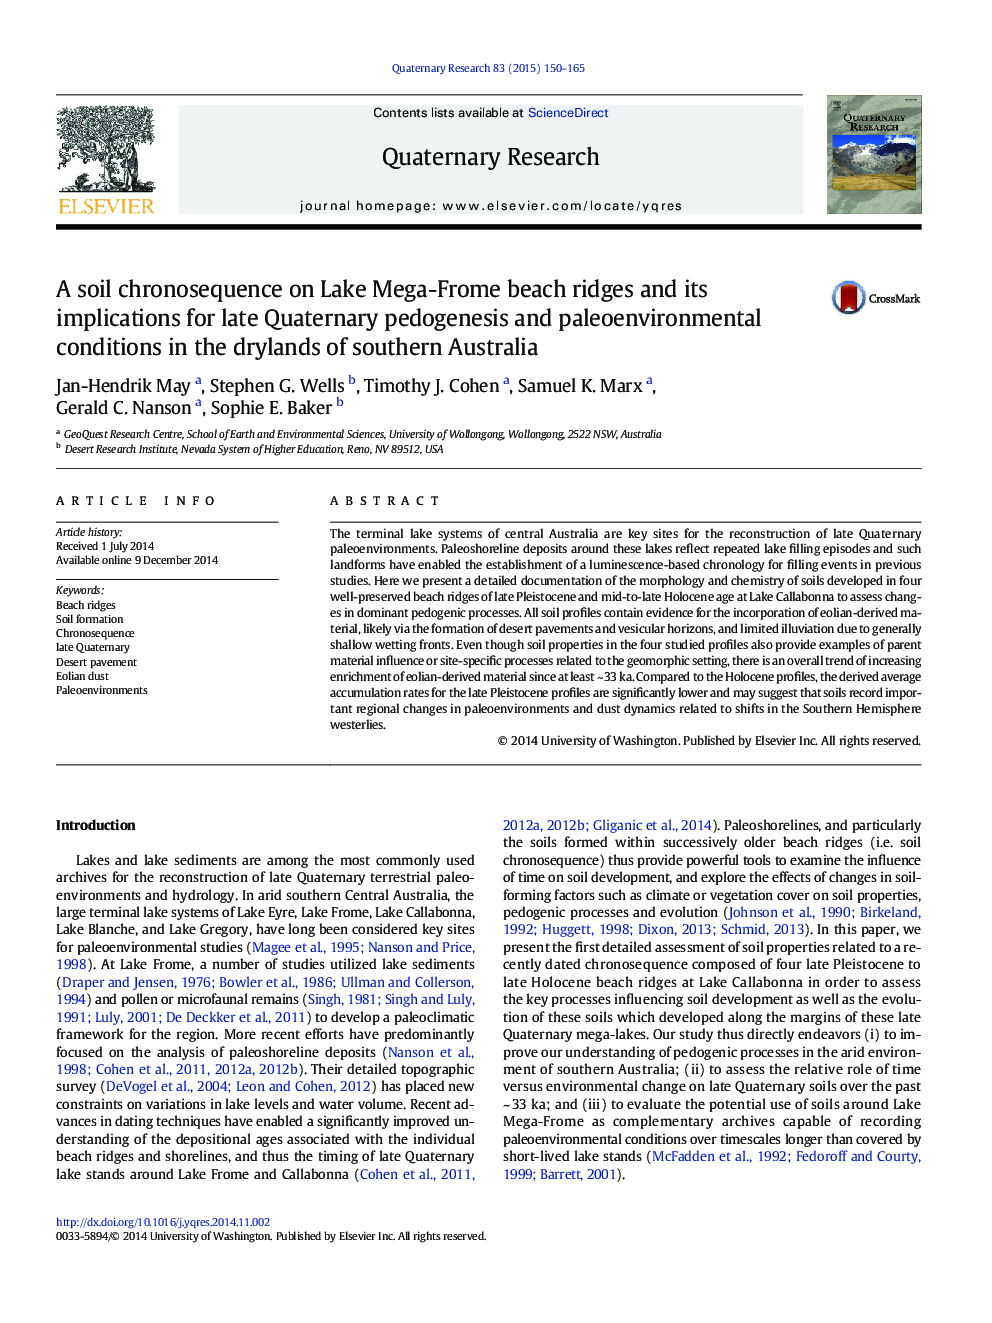 A soil chronosequence on Lake Mega-Frome beach ridges and its implications for late Quaternary pedogenesis and paleoenvironmental conditions in the drylands of southern Australia